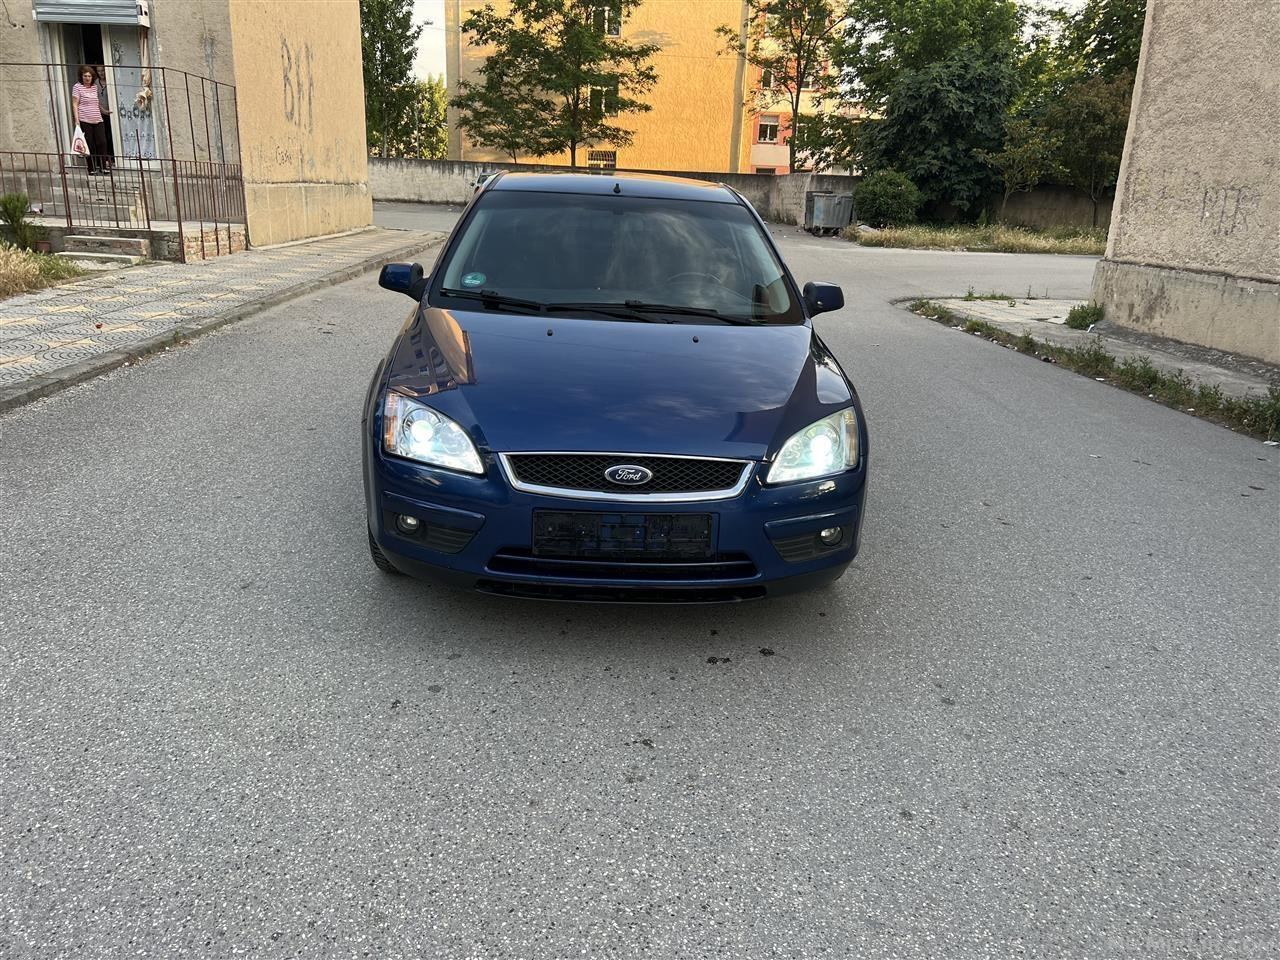 Ford Focus 1.6 Nafte. 2007